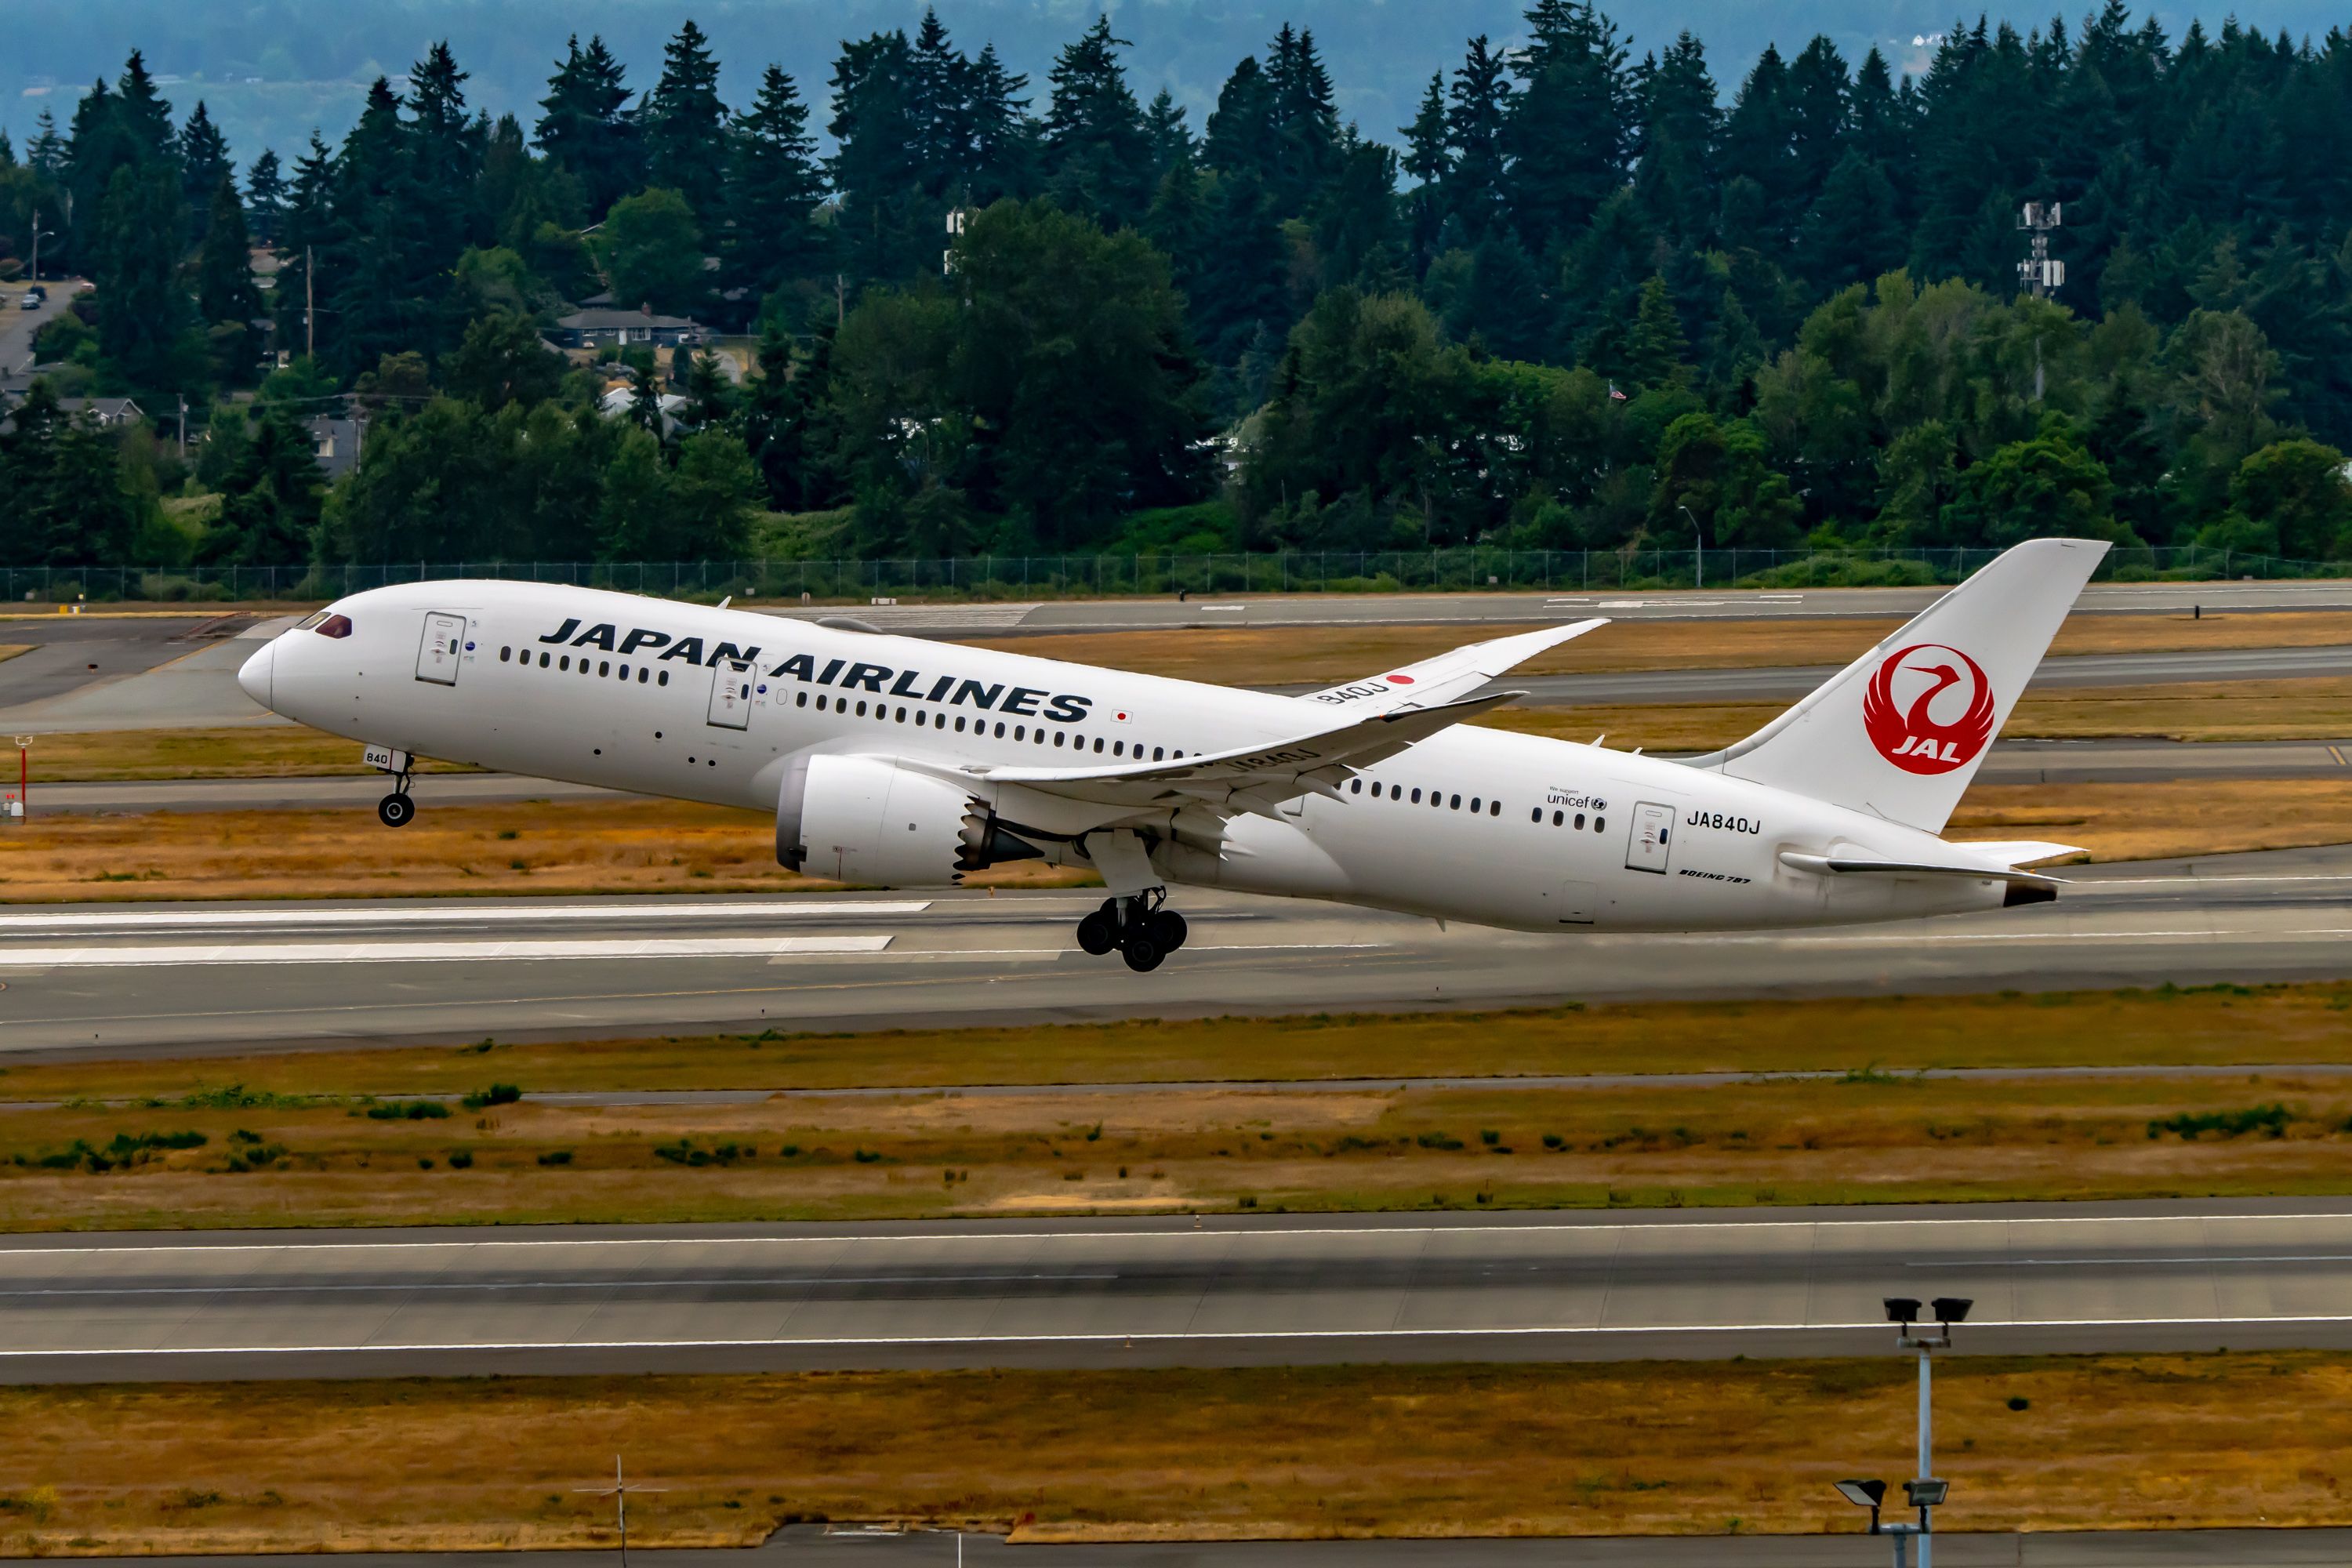 Japan Airlines Boeing 787 taking off.